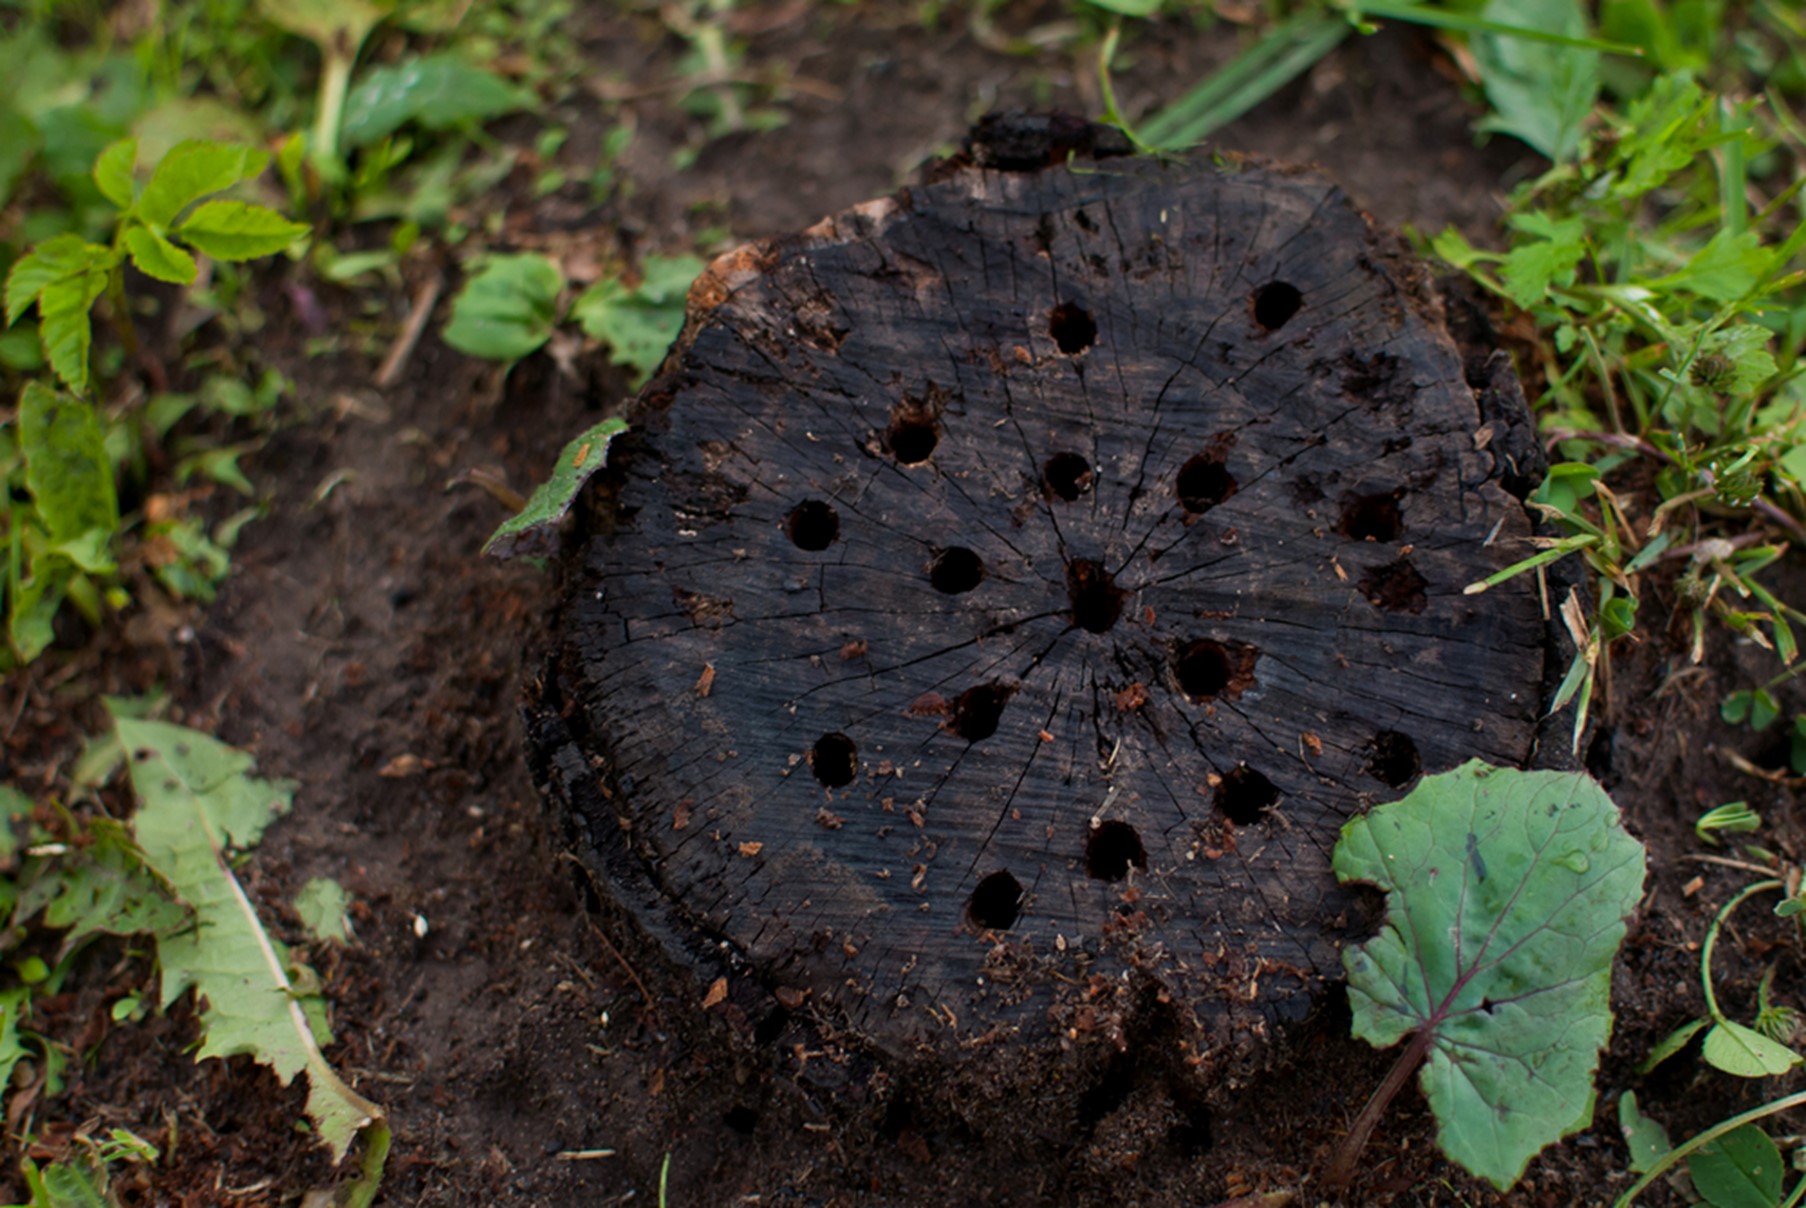 how to stop tree stumps from sprouting: Burining method